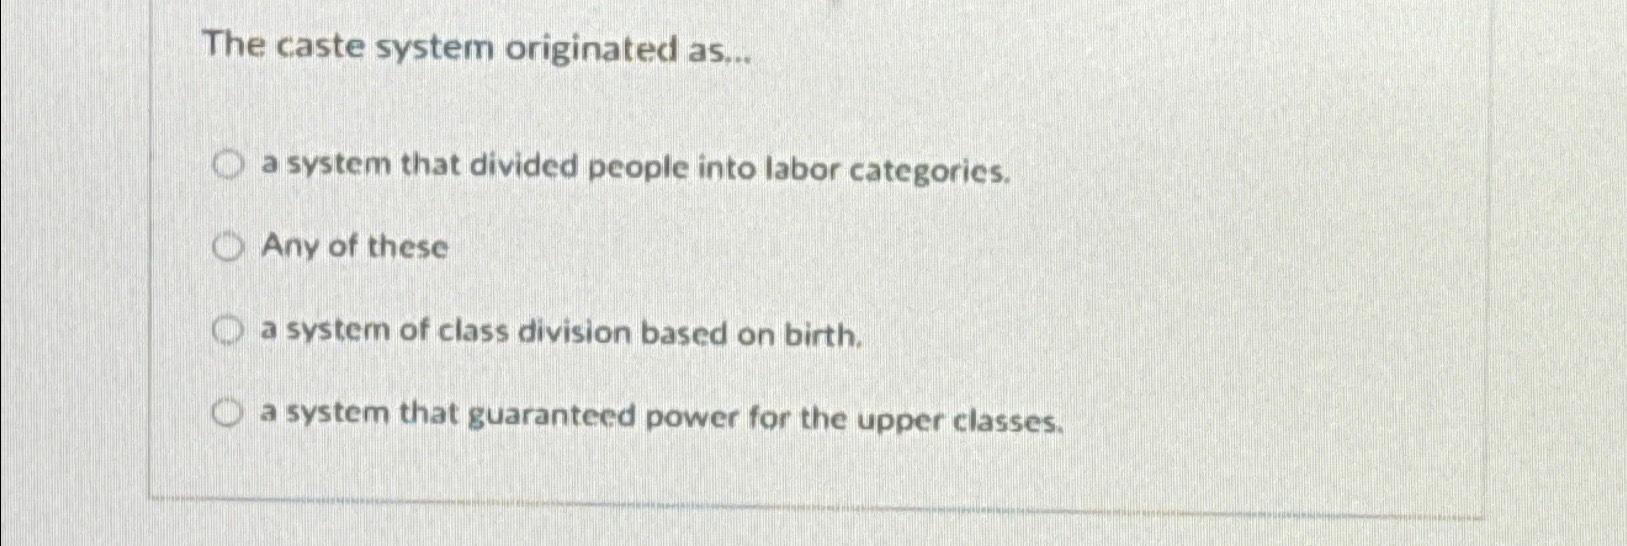 The caste system originated as... a system that divided people into labor categories. Any of these a system